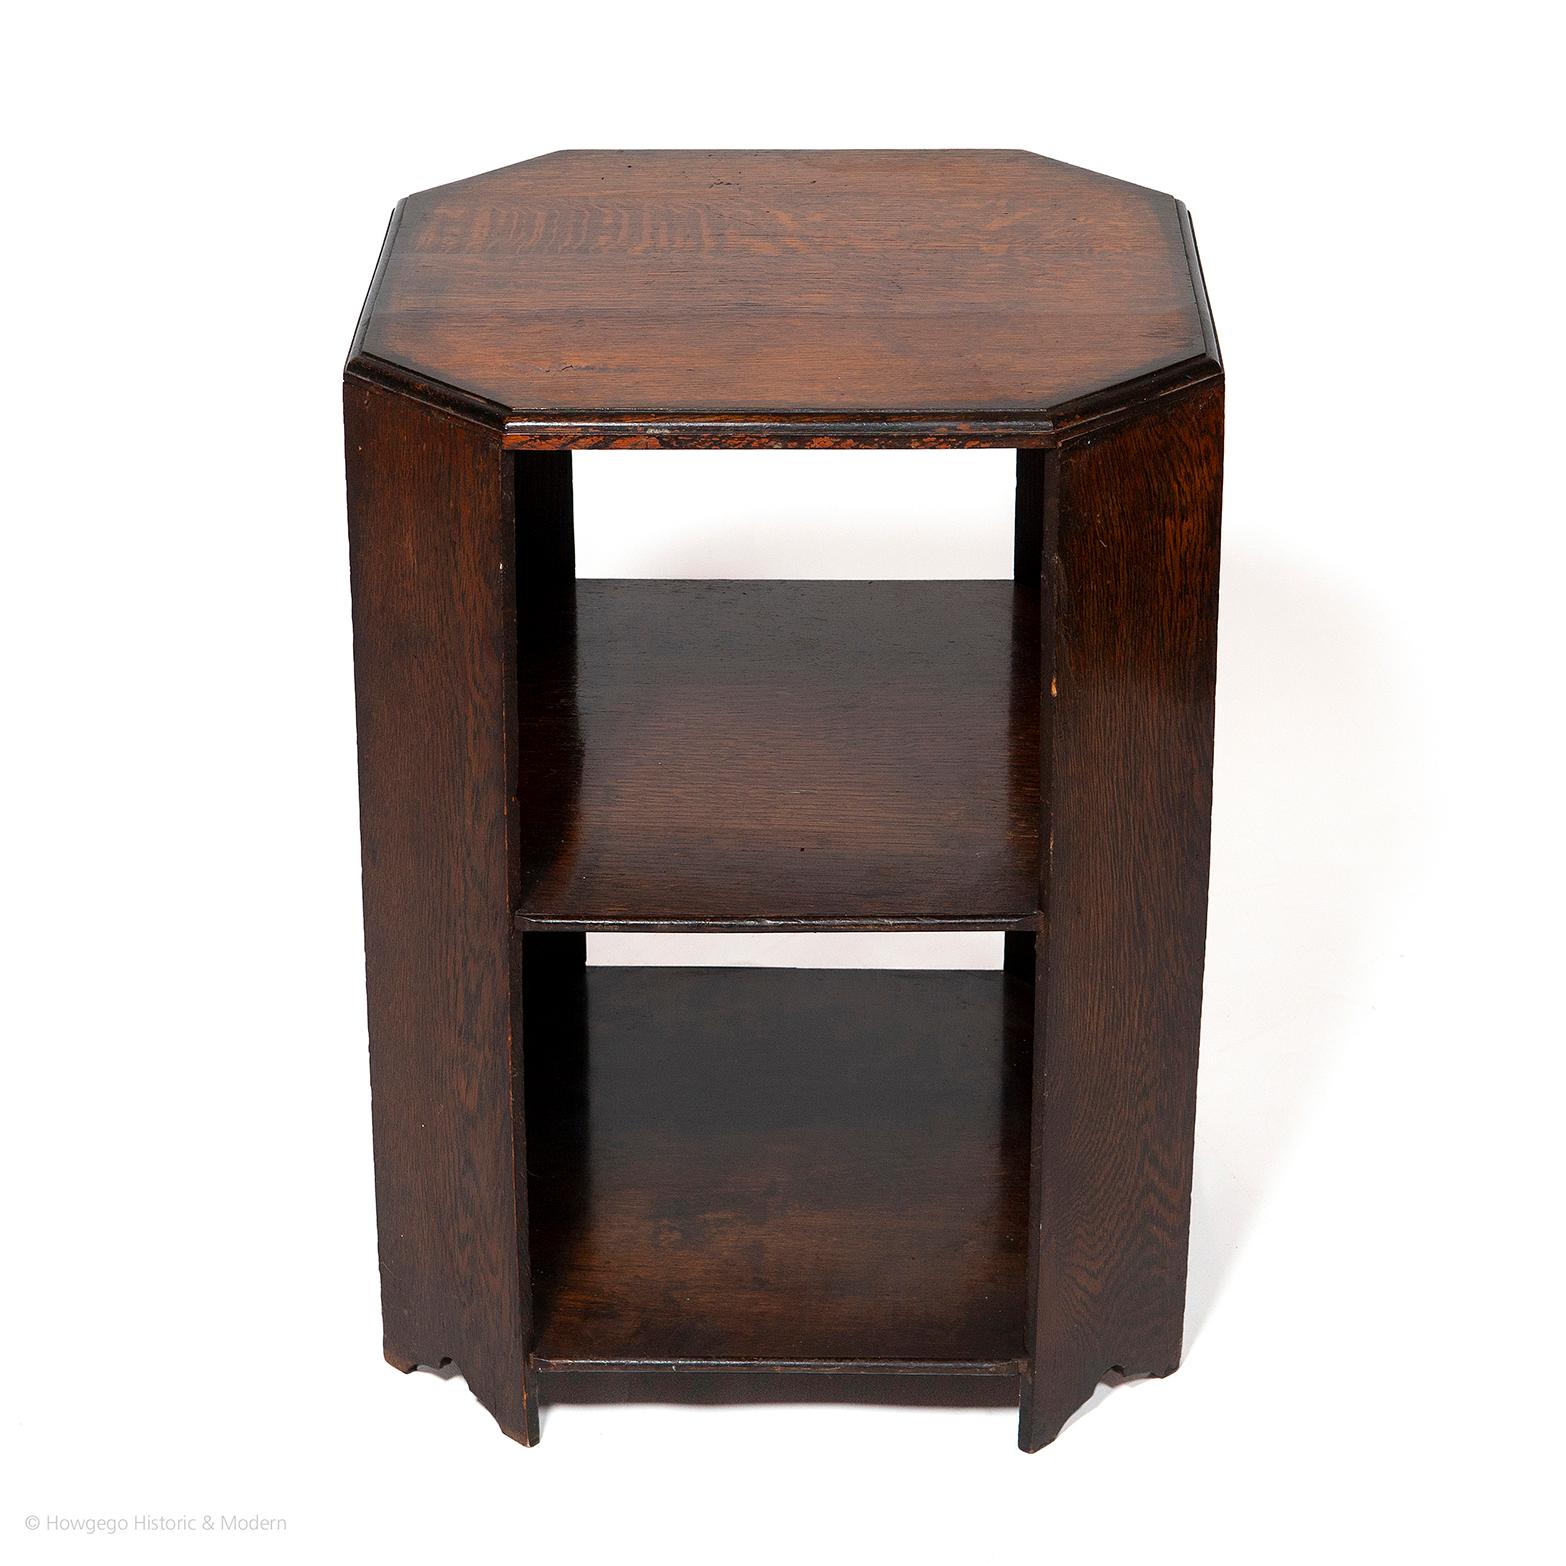 - Classic Arts & Crafts design attributed to Heals
- Elegant architectural form with the angled supports creating the octagonal shape
- Small proportions which are practical for occasional tables
- Tiered design creates ample space for books,